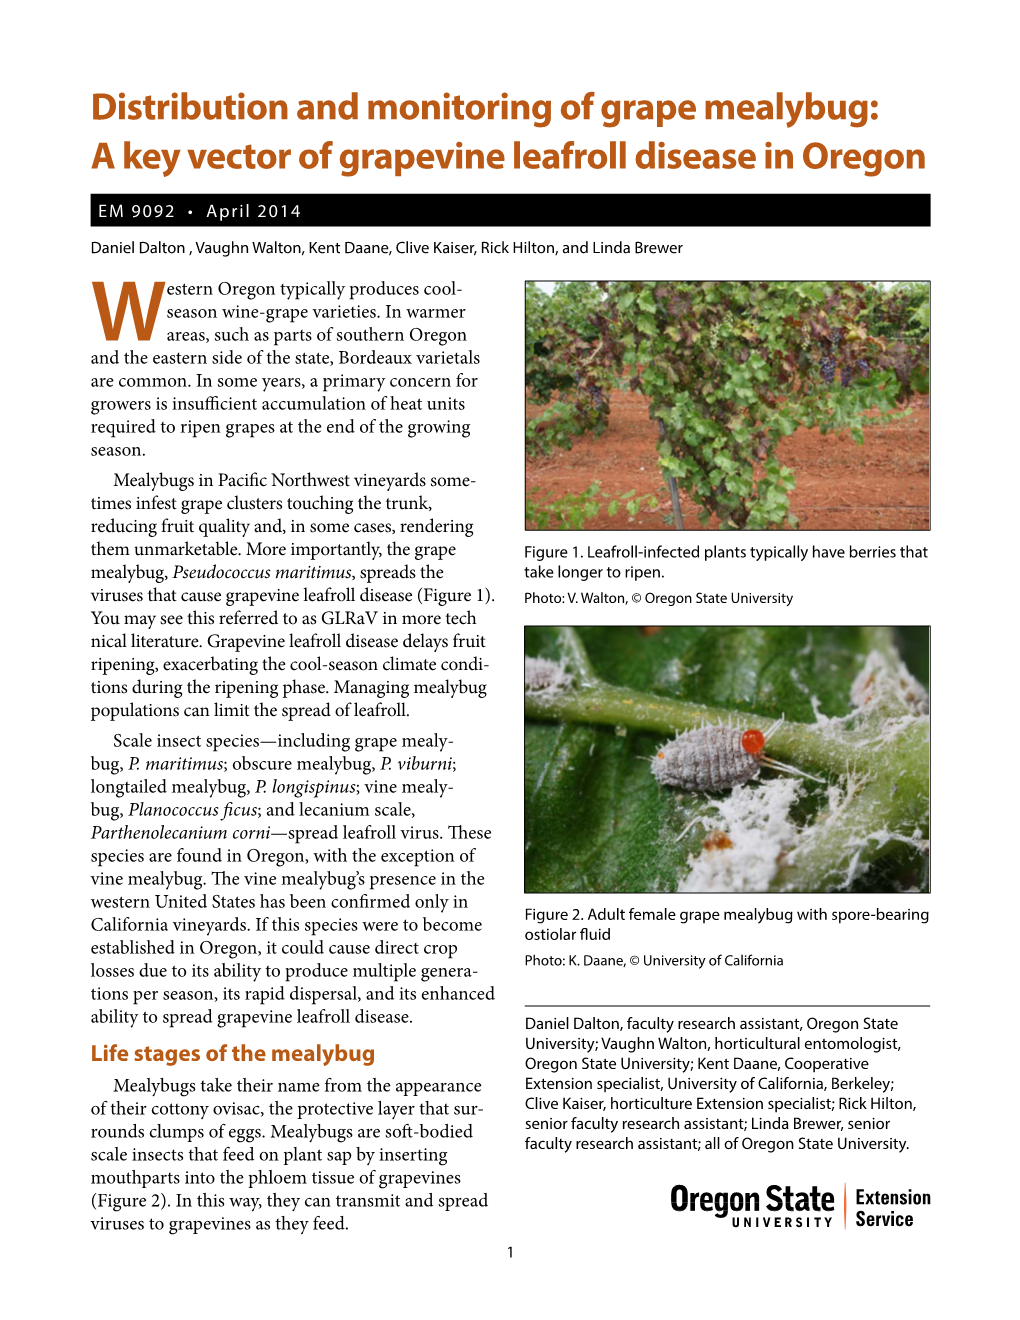 A Key Vector of Grapevine Leafroll Disease in Oregon